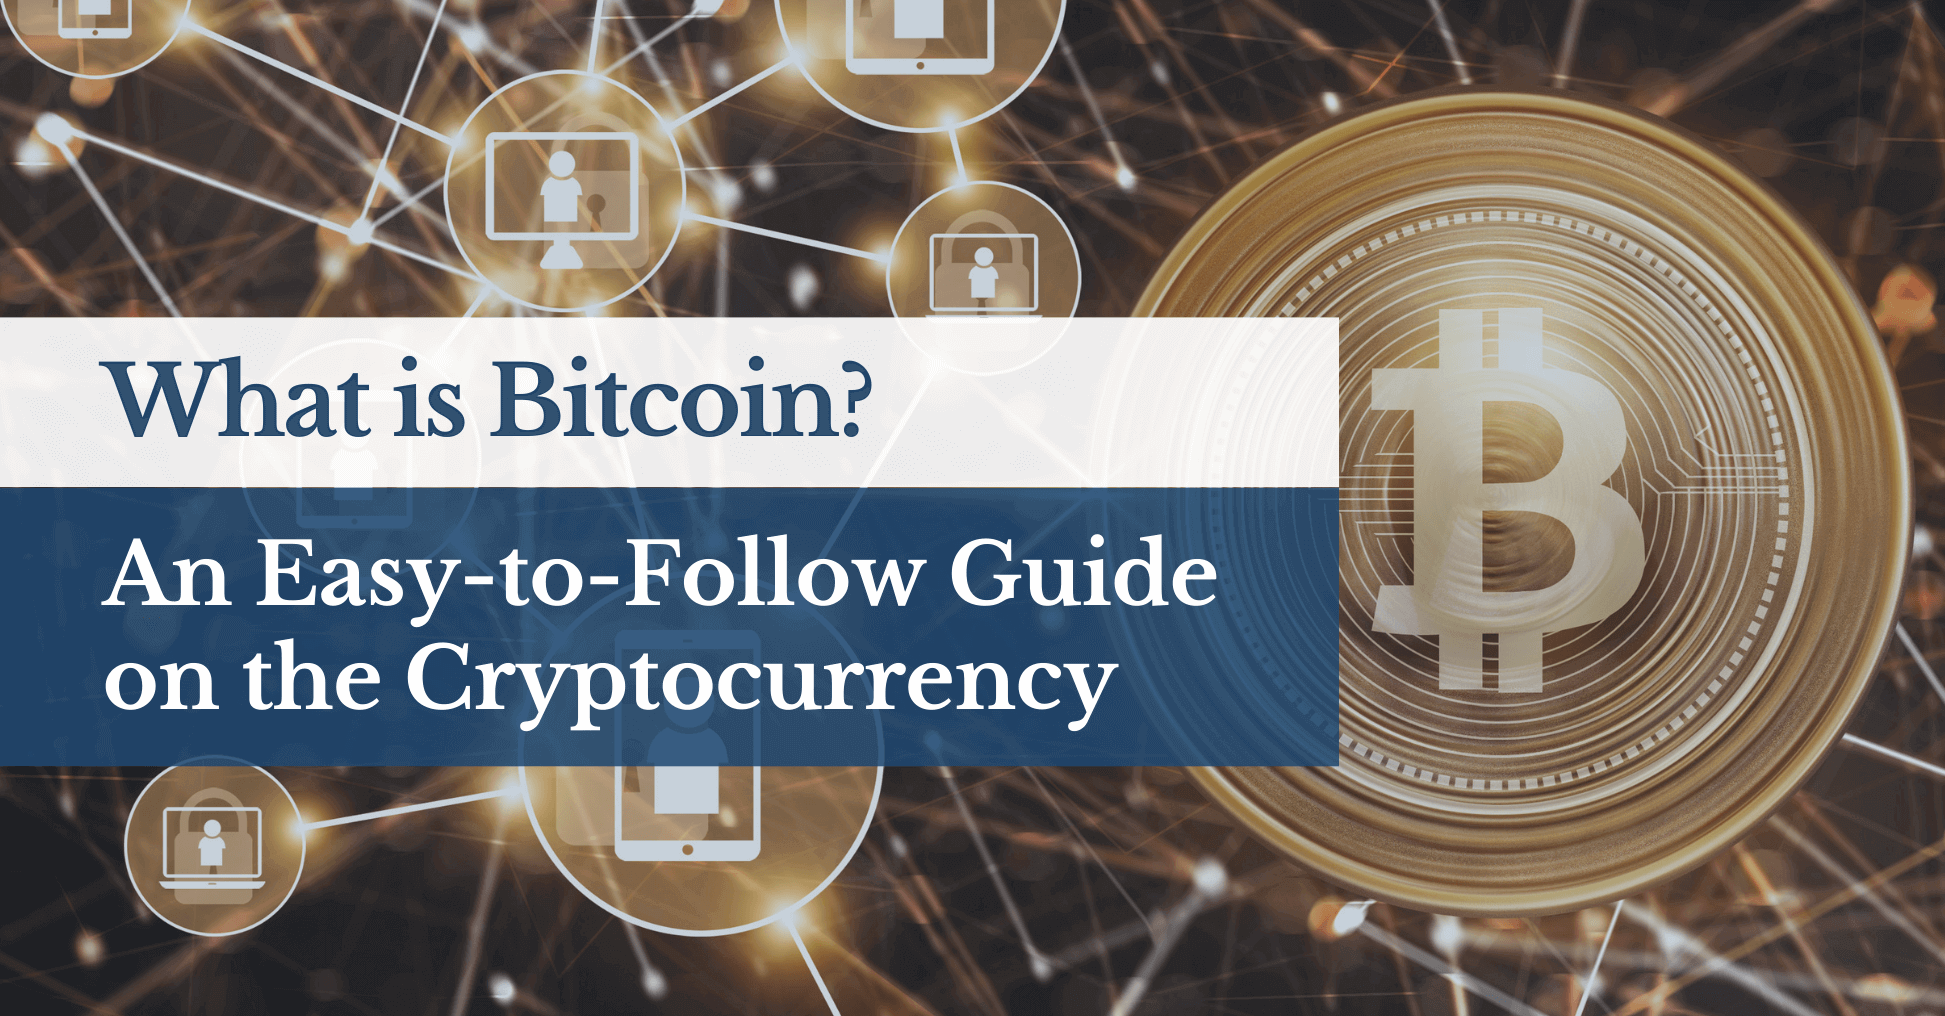 What is Bitcoin?: An Easy-to-Follow Guide on The Cryptocurrency